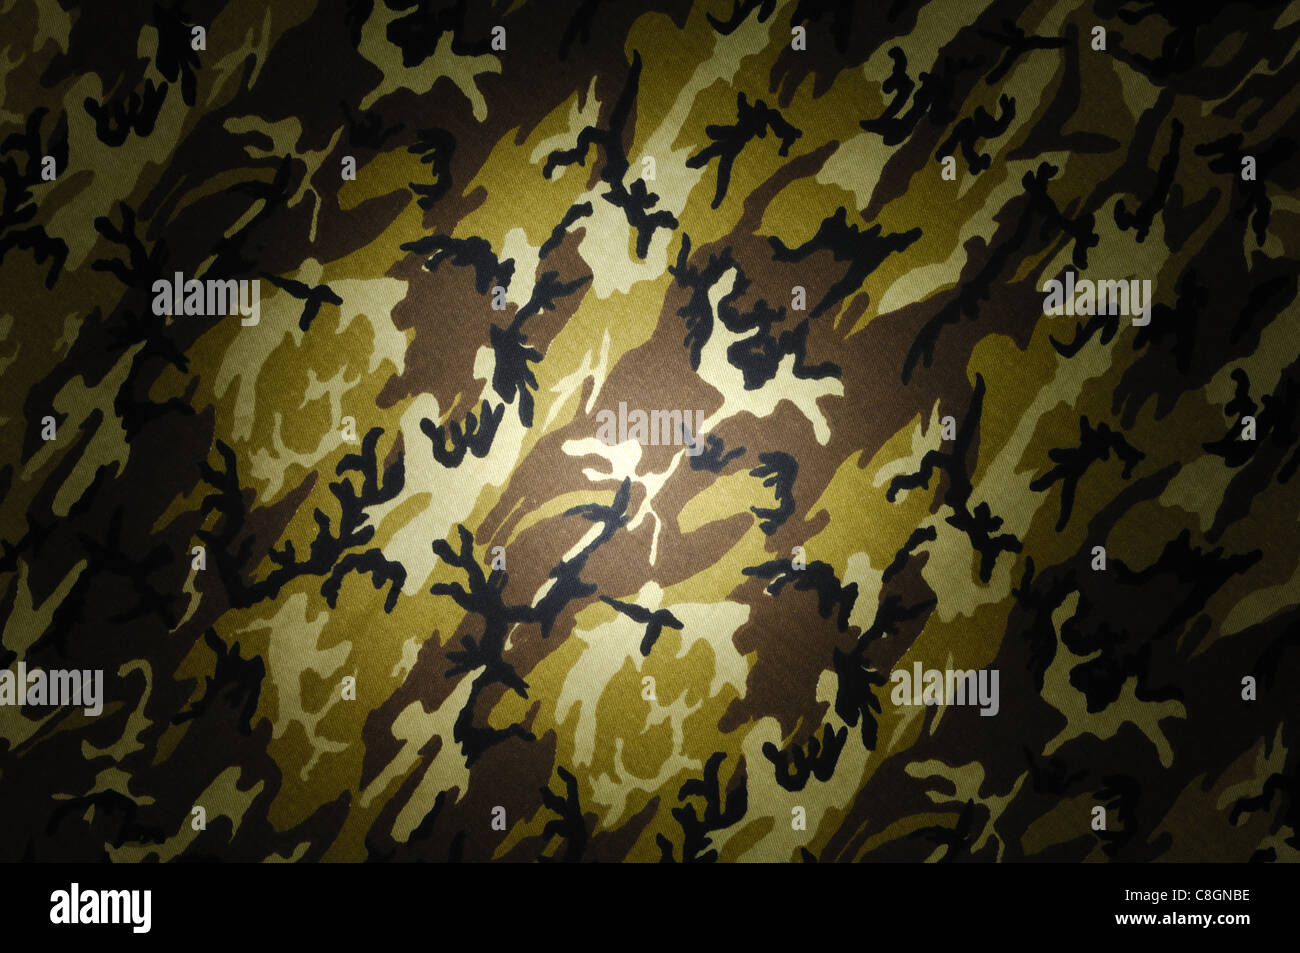 Spotlighting on green, brown, tan and black camouflage material Stock Photo